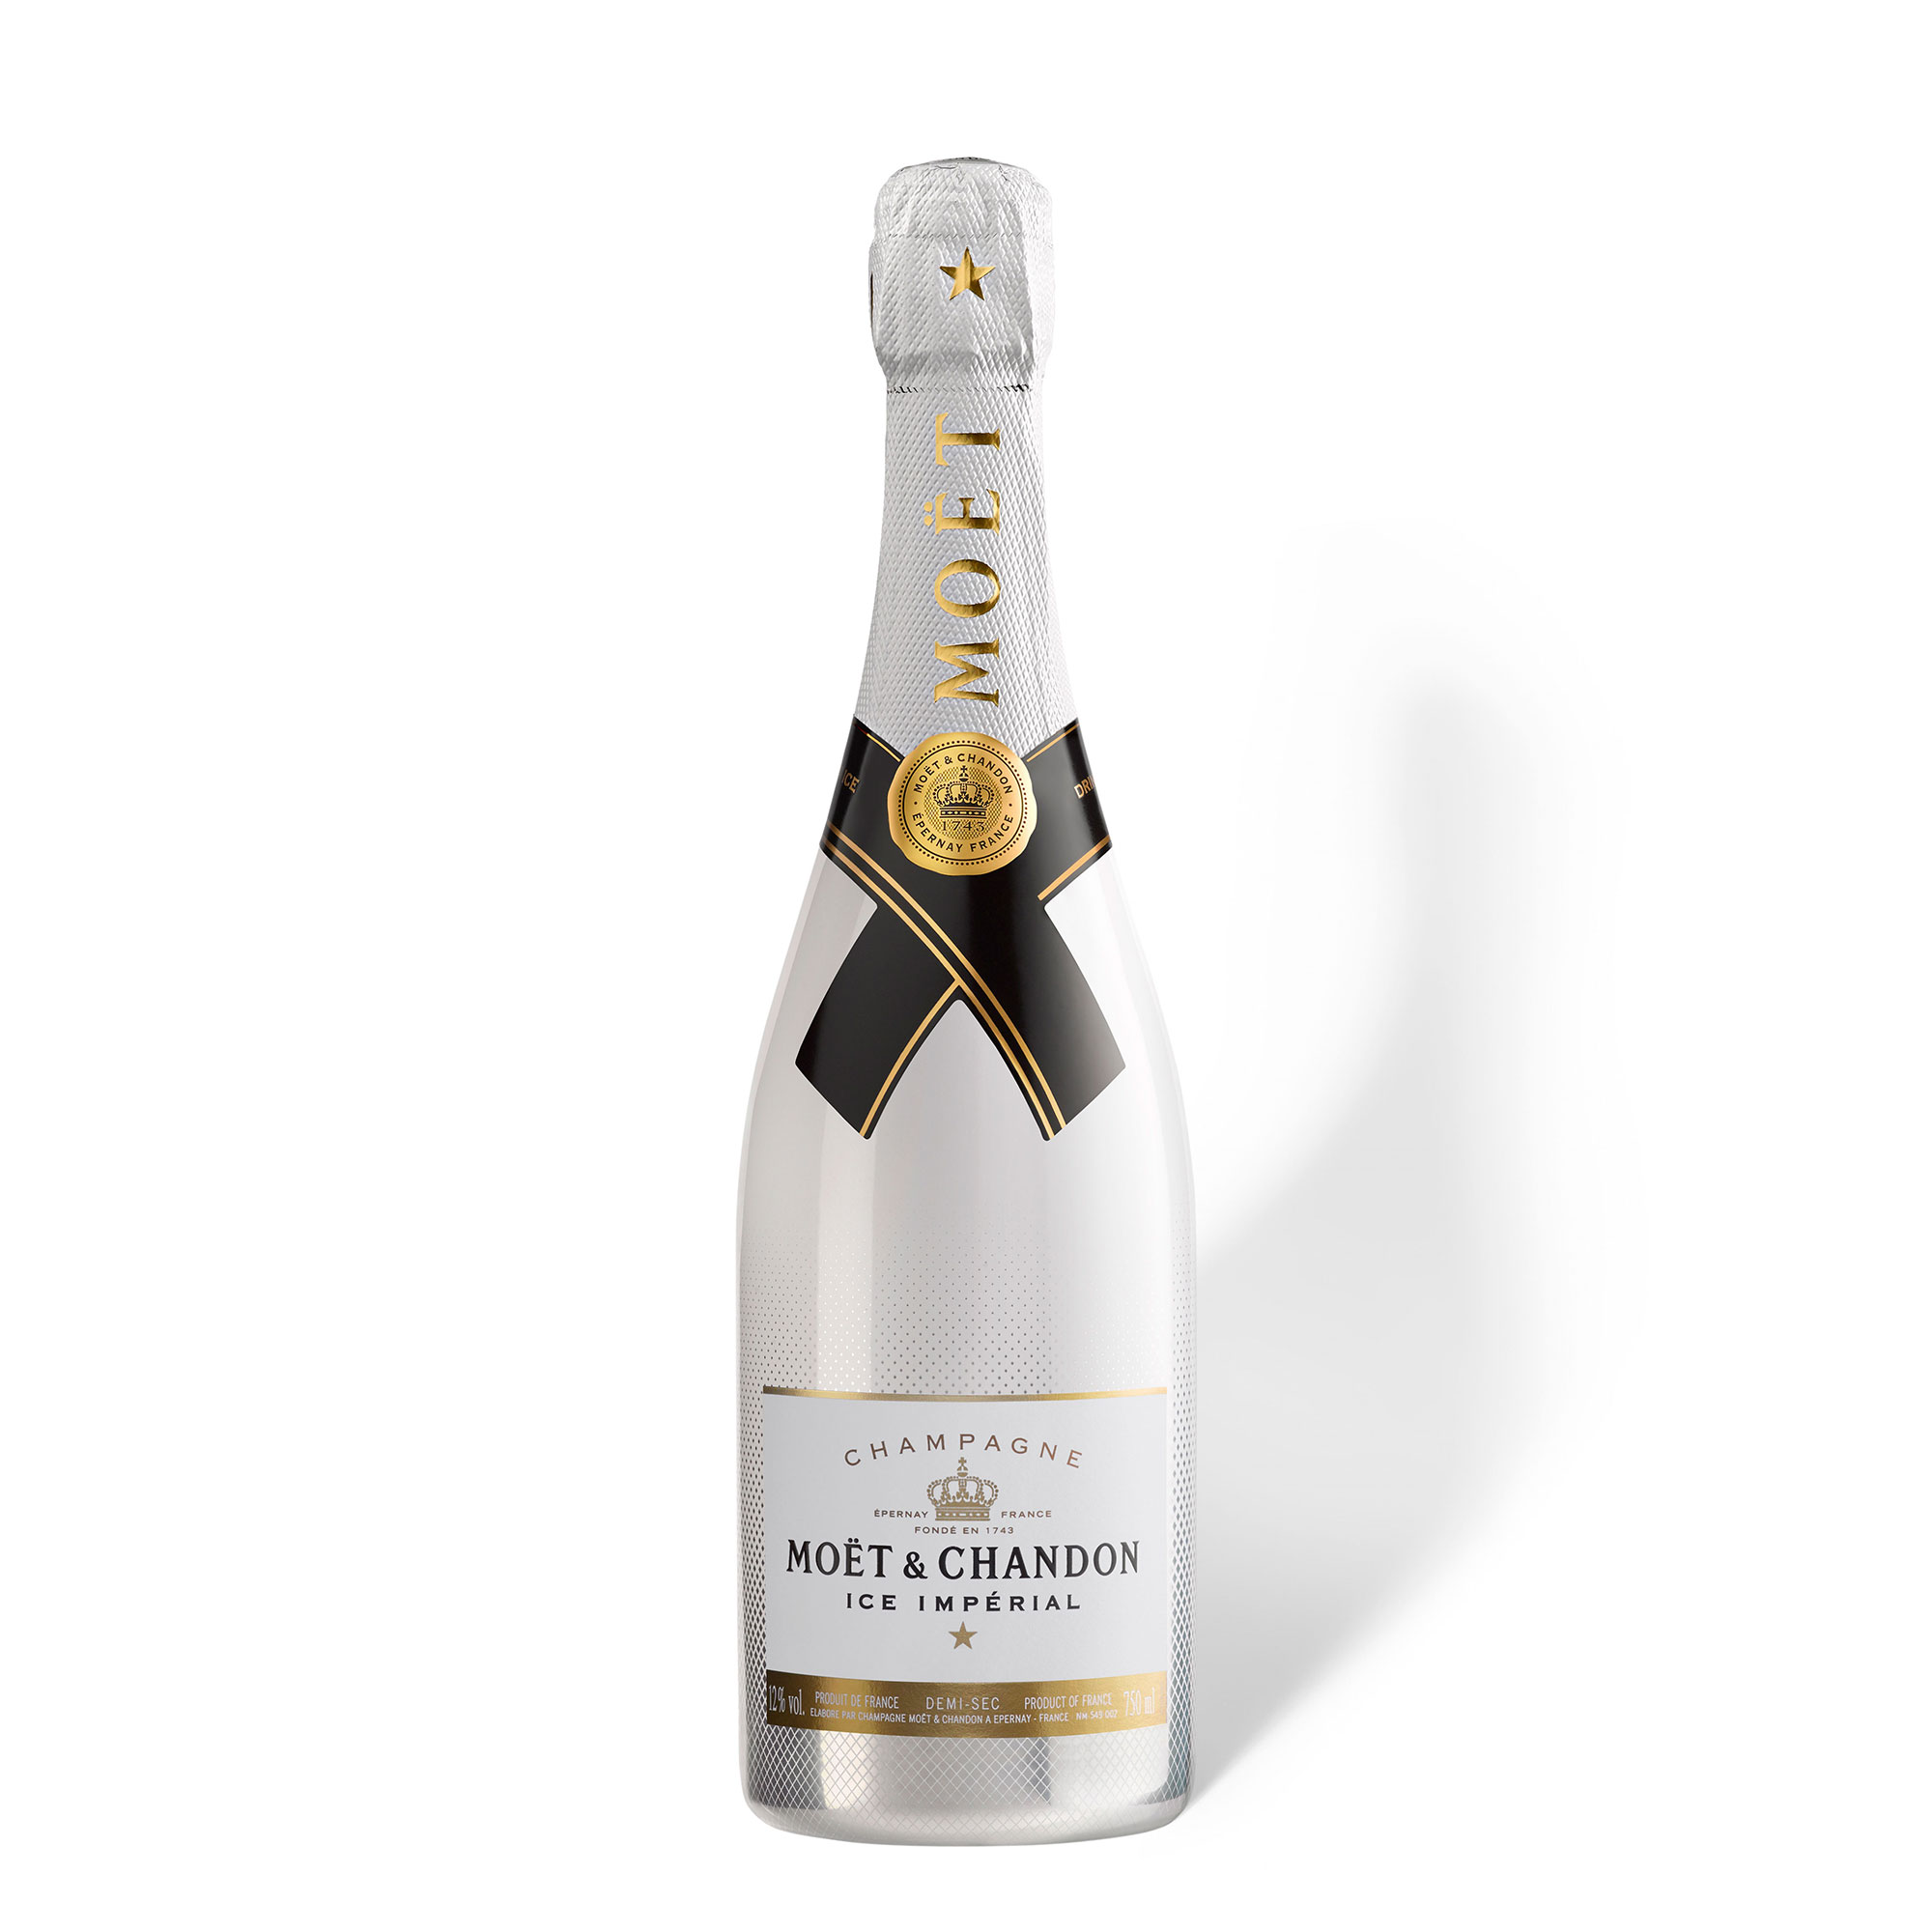 Moet and Chandon Ice White Imperial Champagne 75cl Great Price and Home Delivery